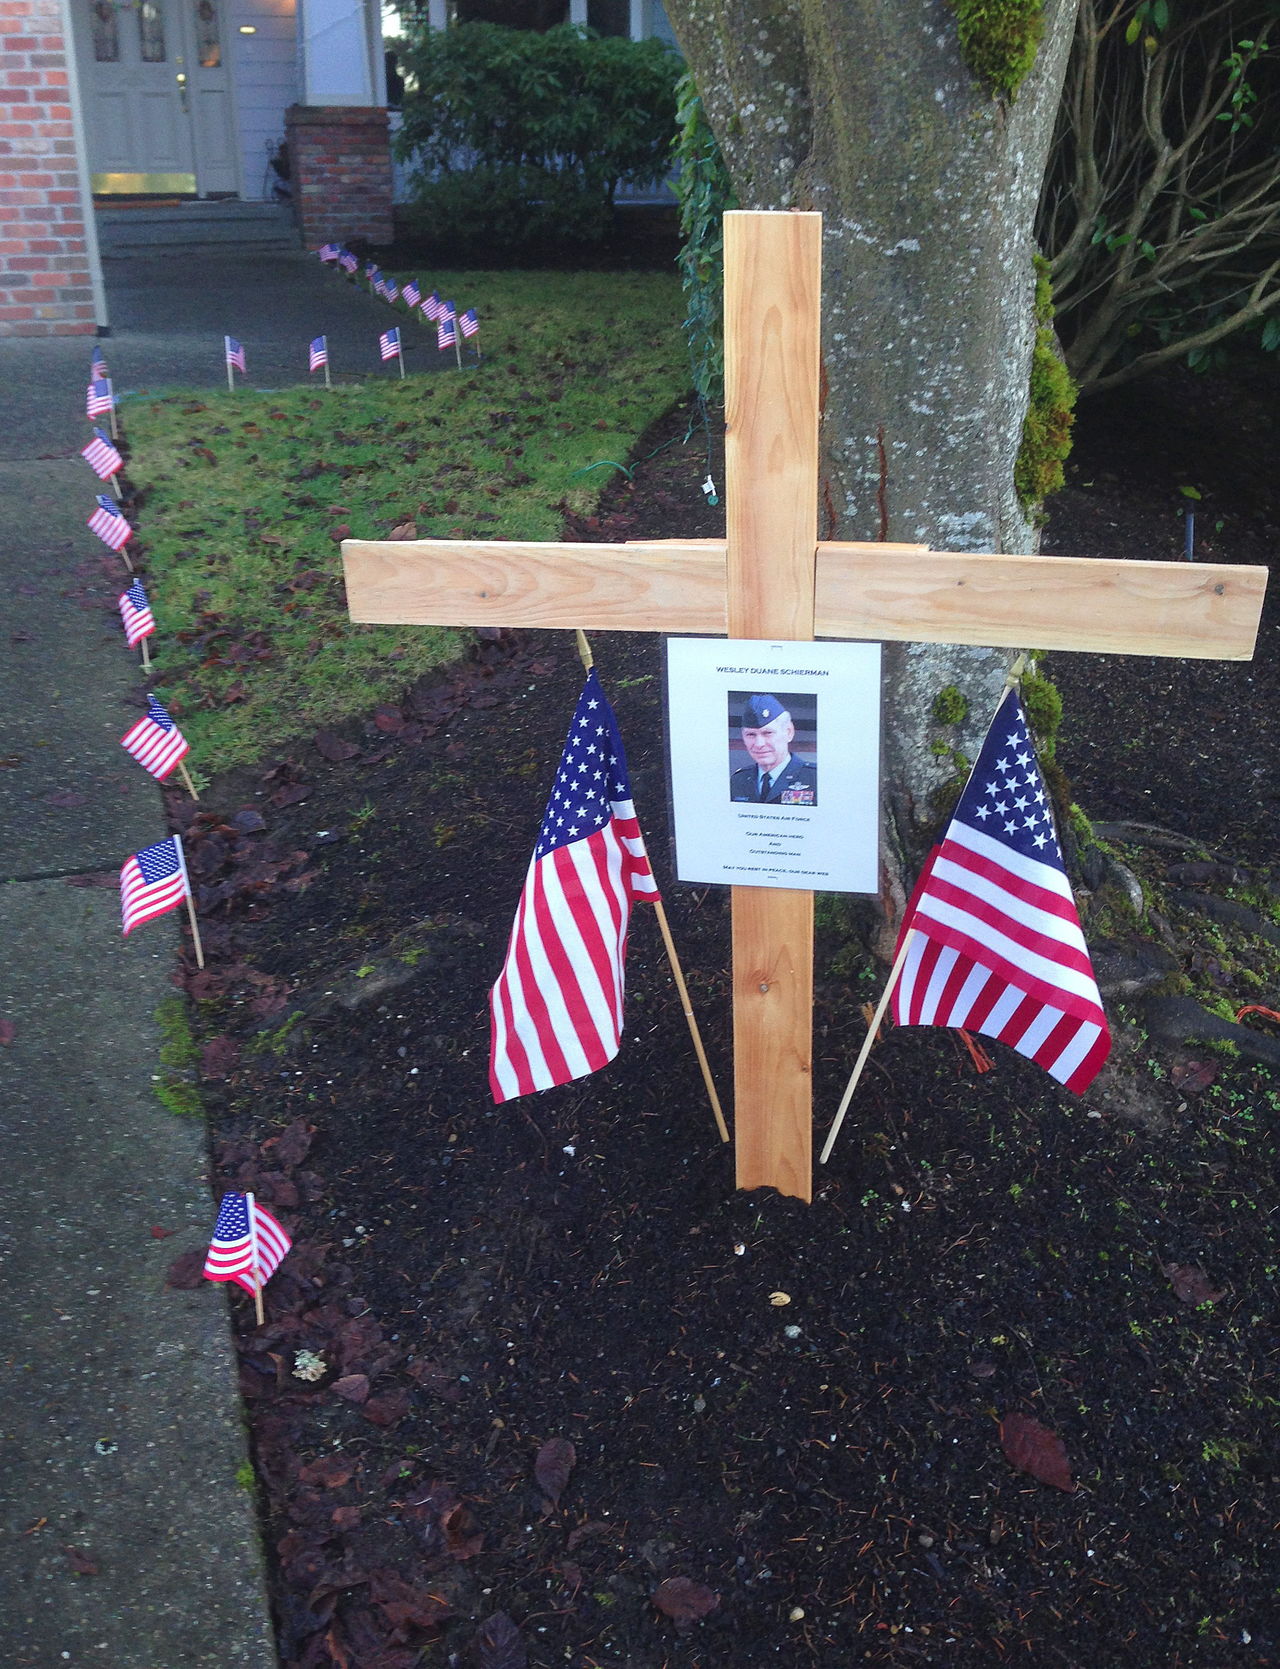 This memorial to retired Air Force Maj. Wesley Schierman was put up by neighbors outside his home in Everett’s Silver Lake area after Schierman died in Everett in 2014.